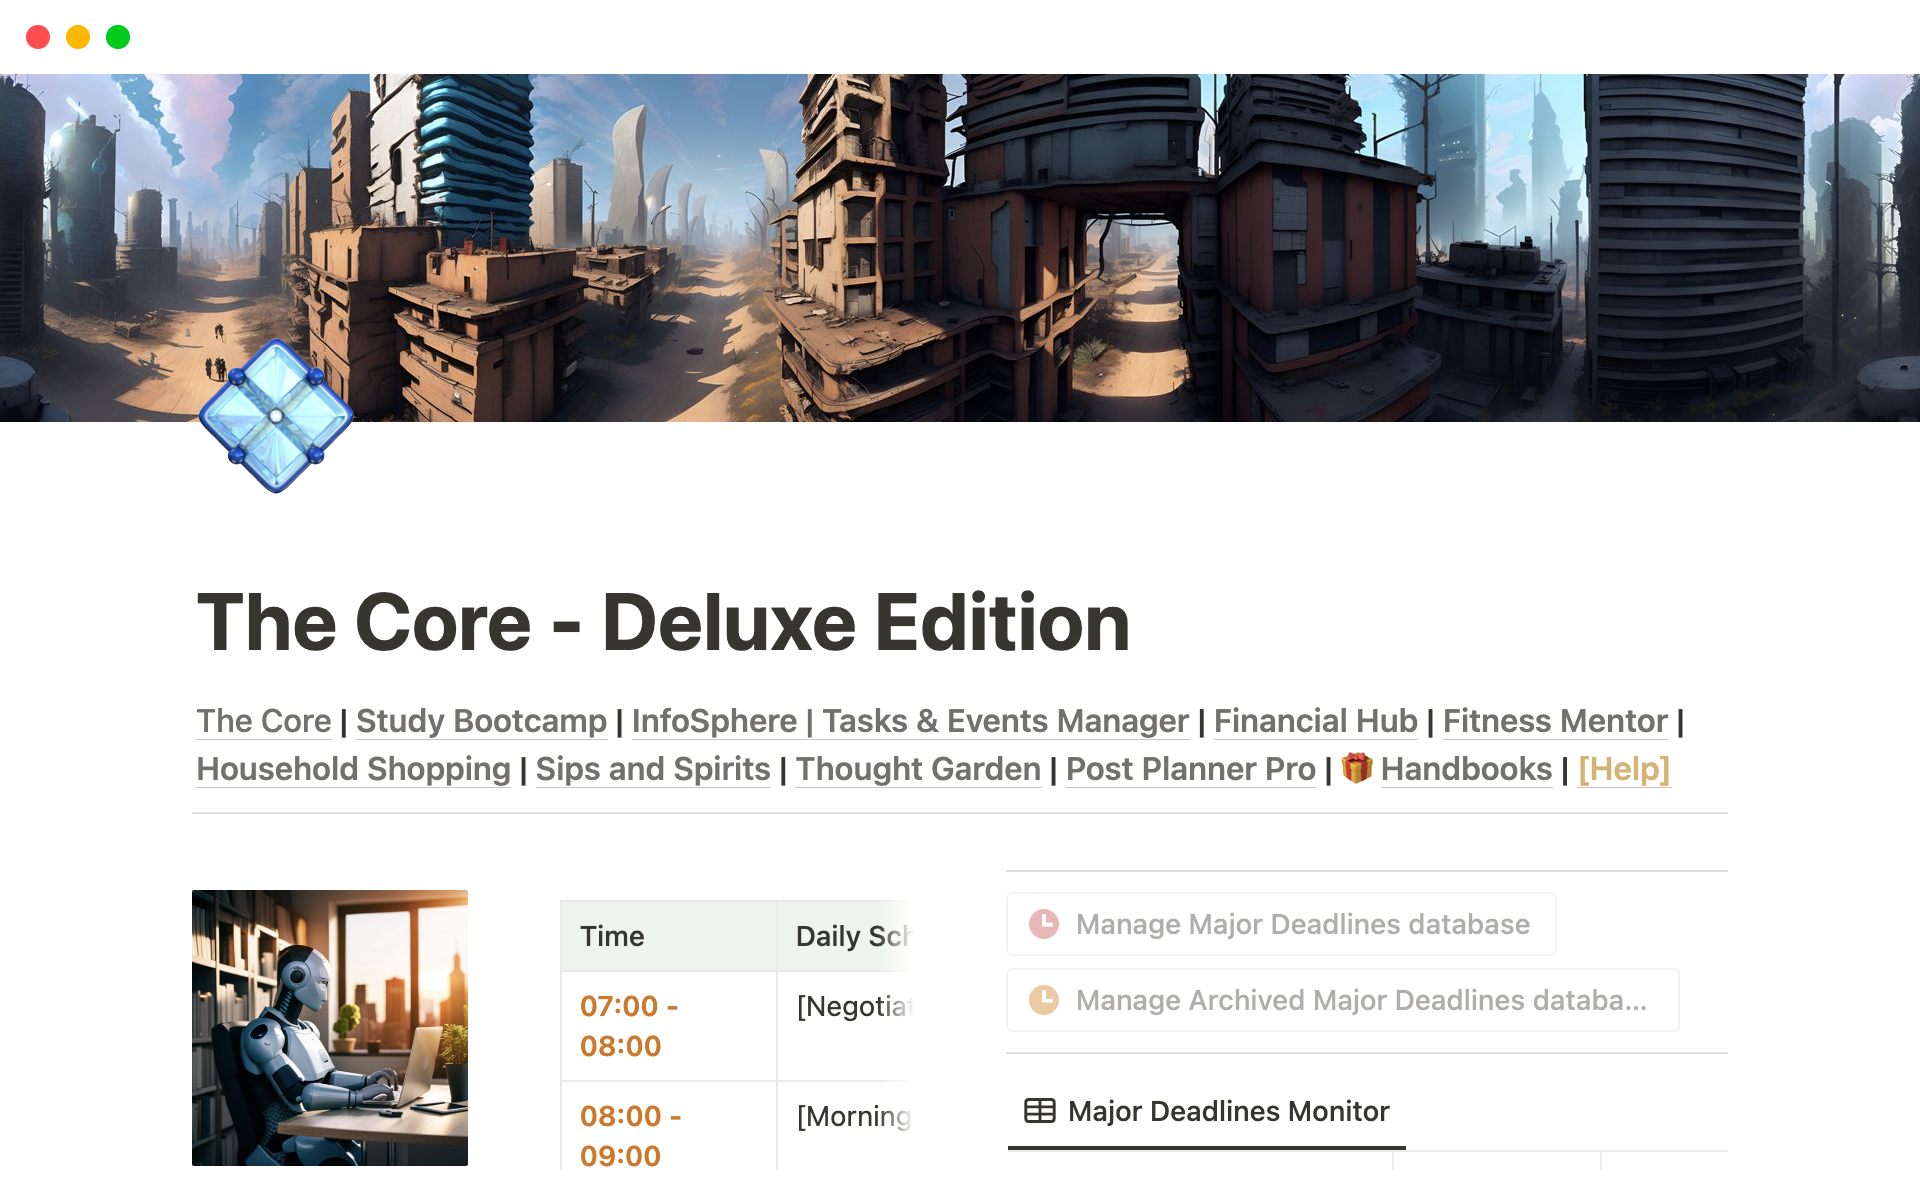 The Deluxe Edition of 'The Core' amplifies your management capabilities by including everything from the Pro Edition, along with the added benefits of 'Fitness Mentor', 'Sips and Spirits', and 'Post Planner Pro'.